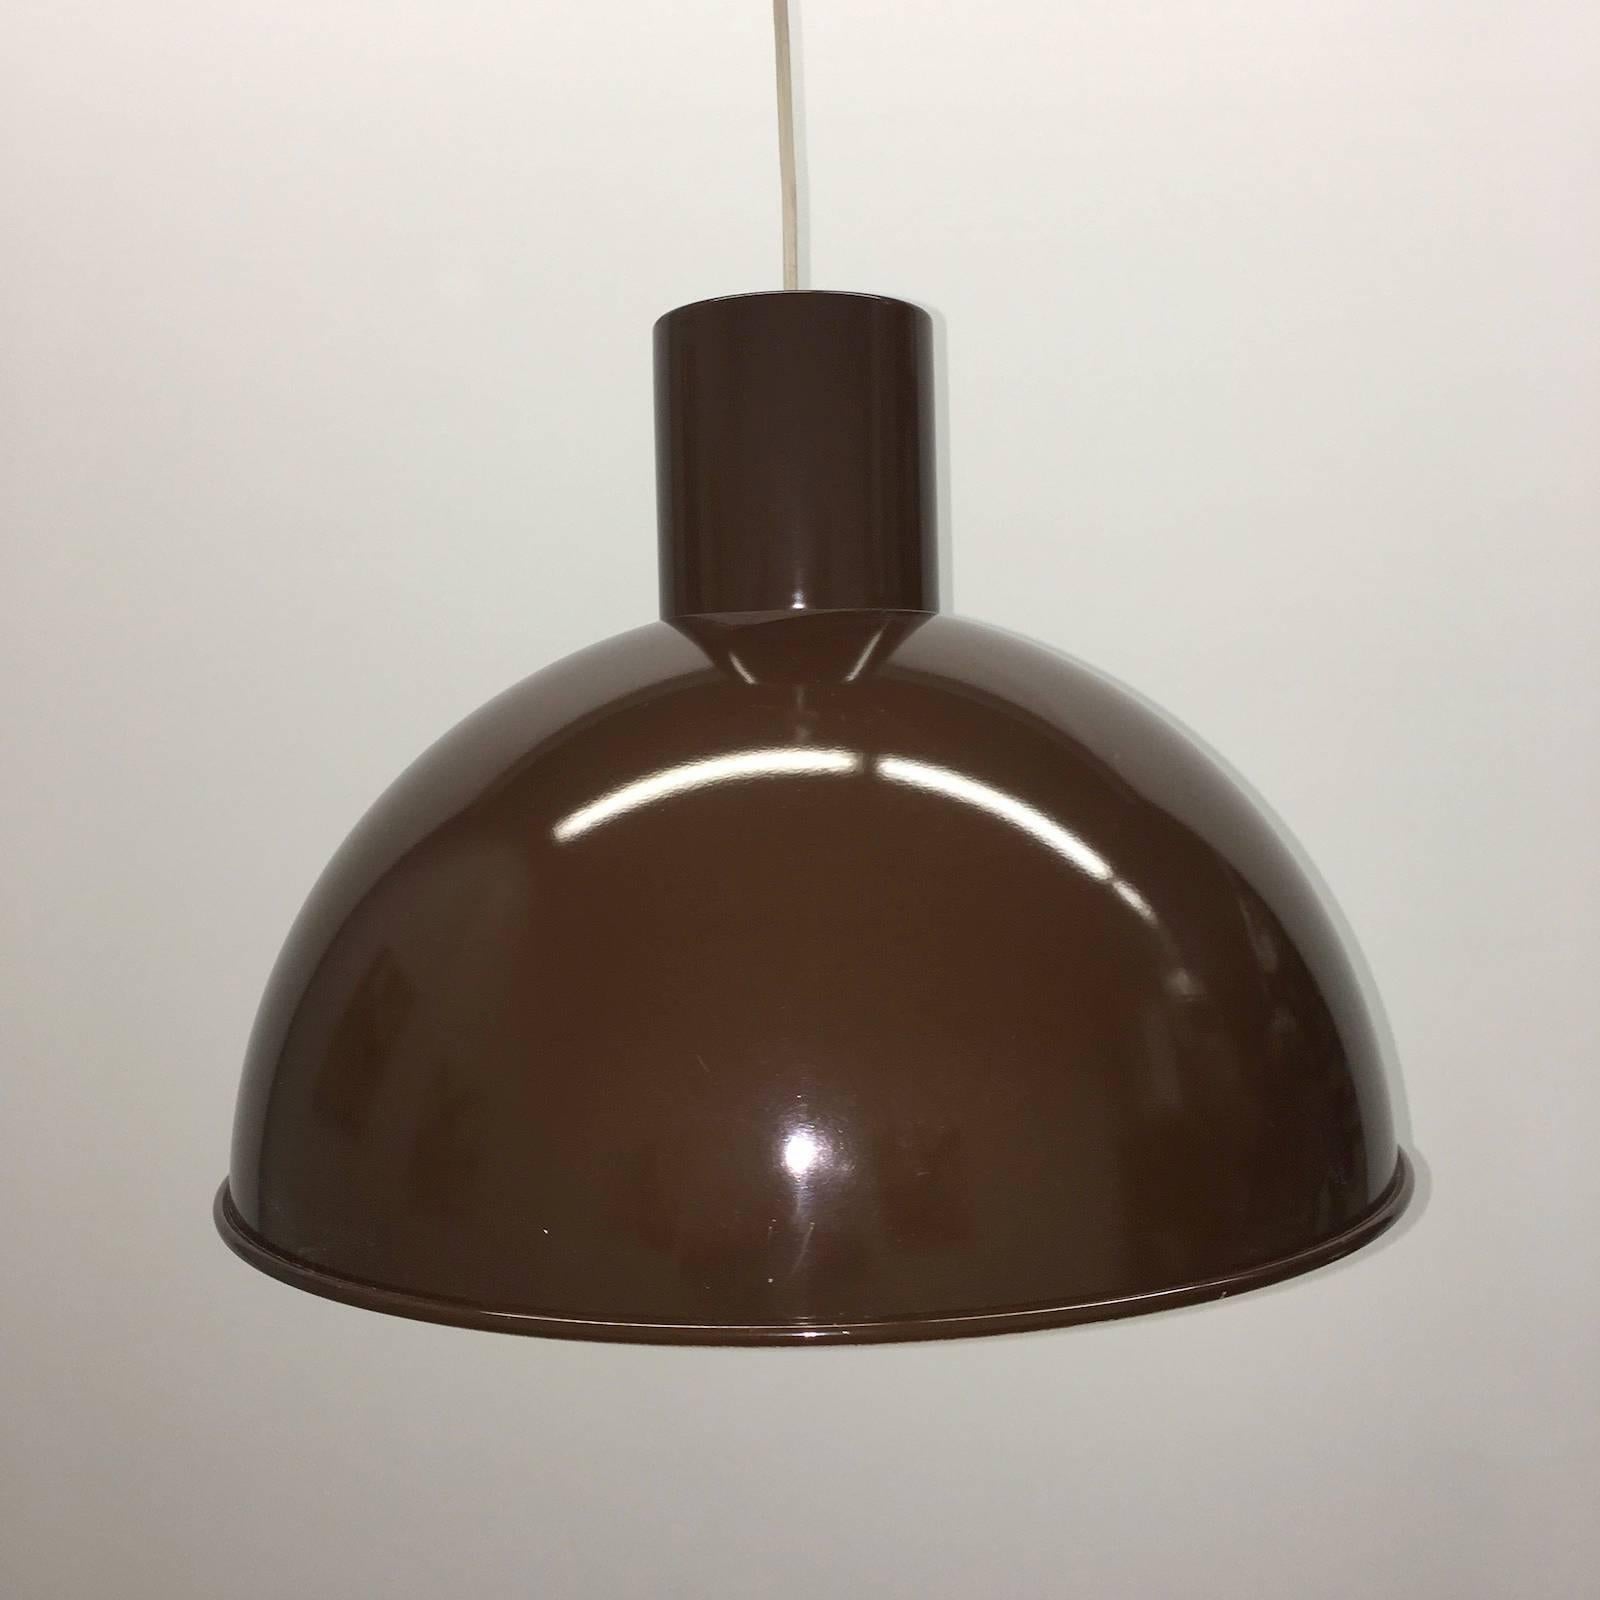 Pendant light by Jo Hammerborg for Fog and Mørup, Denmark. The fixture requires one European E27 Edison bulb, each bulb up to 75 watts. With minor signs of wear as expected with age and use, light wear and scratches to the metal.